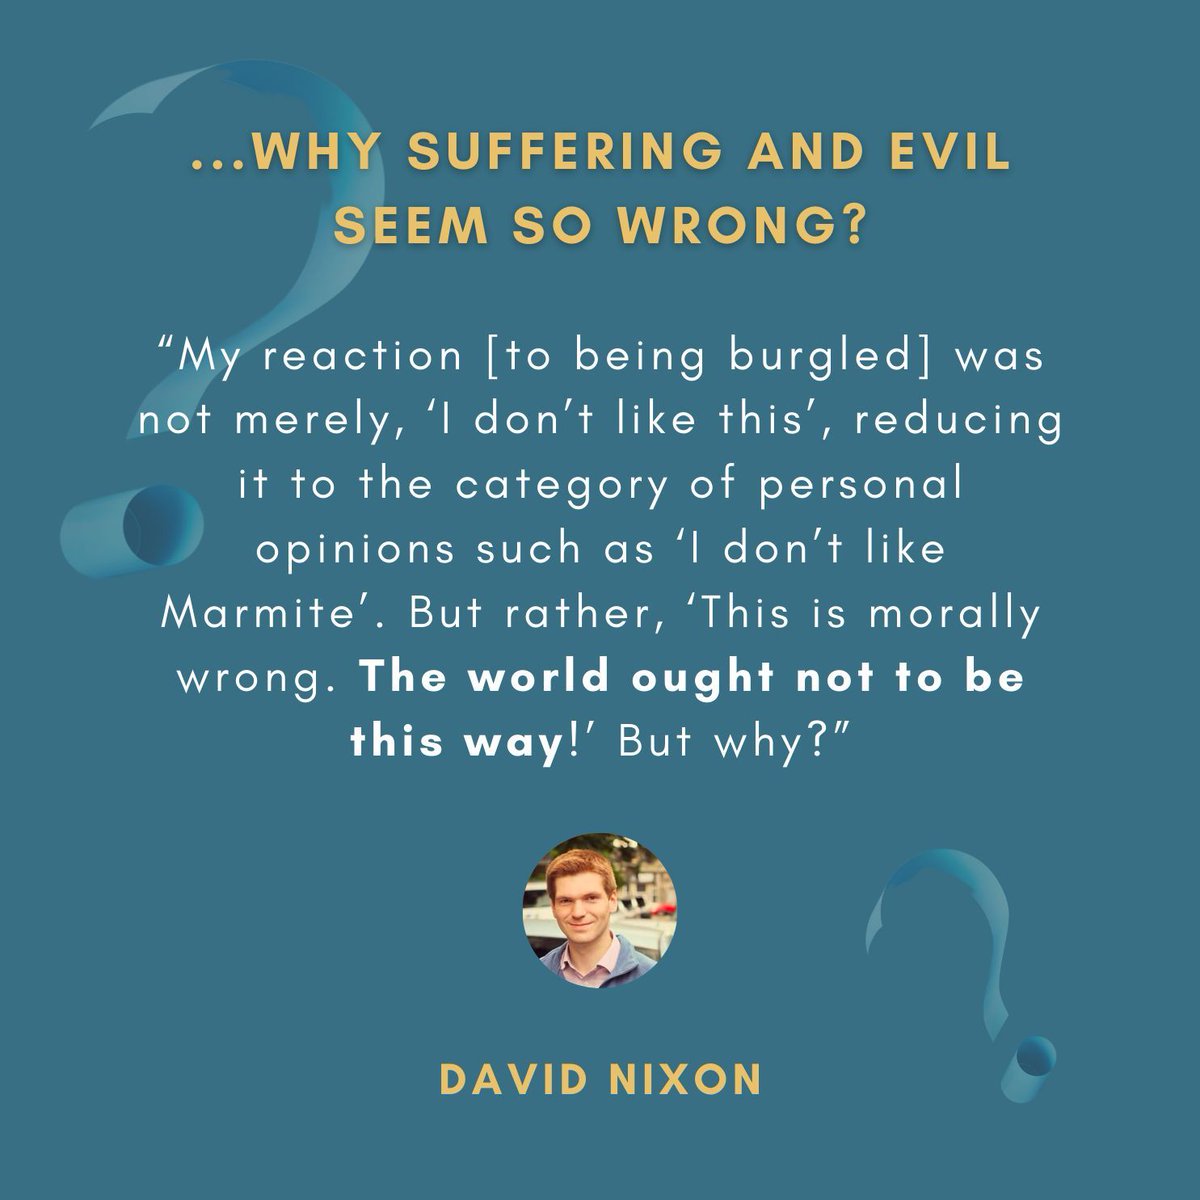 Have you ever wondered why evil & suffering seem so wrong? Why all of us know there's more to justice than just saying 'I feel this way'. The new book from @solascpc 'Have You Ever Wondered?' starts spiritual conversations from questions like these. buff.ly/3UpP7sx